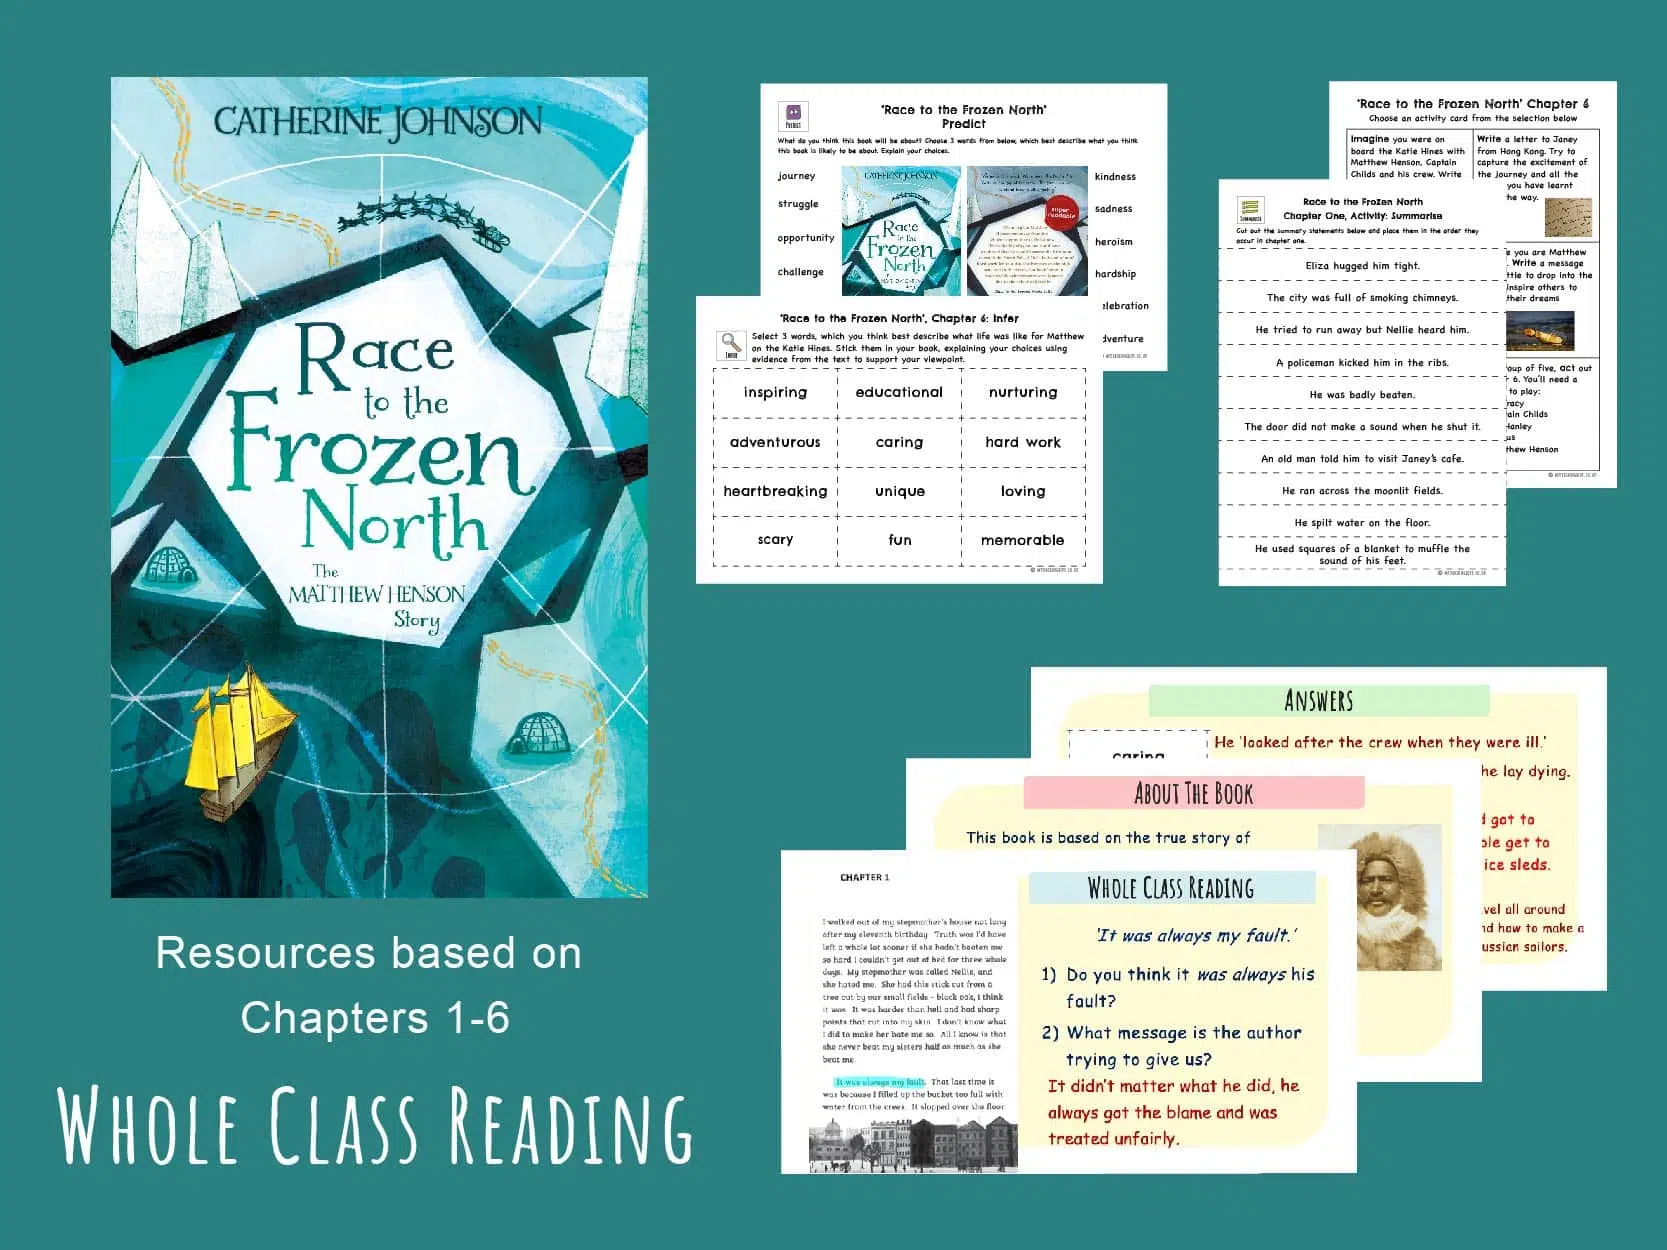 Race to the Frozen North Whole Class Reading resource